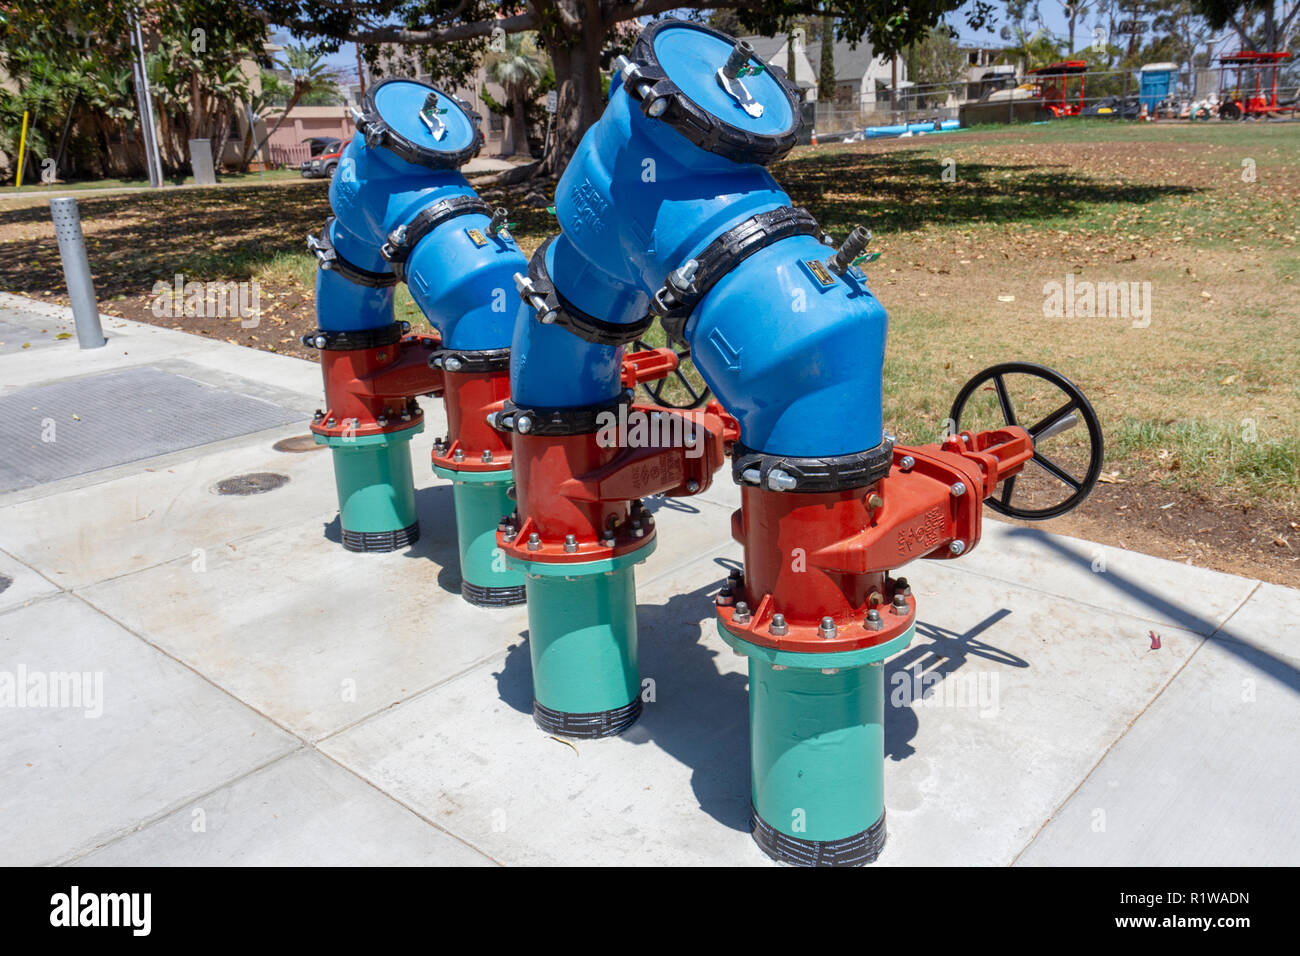 Surface water control pipework including double check backflow preventers, Balboa Park, San Diego, California, United States. Stock Photo